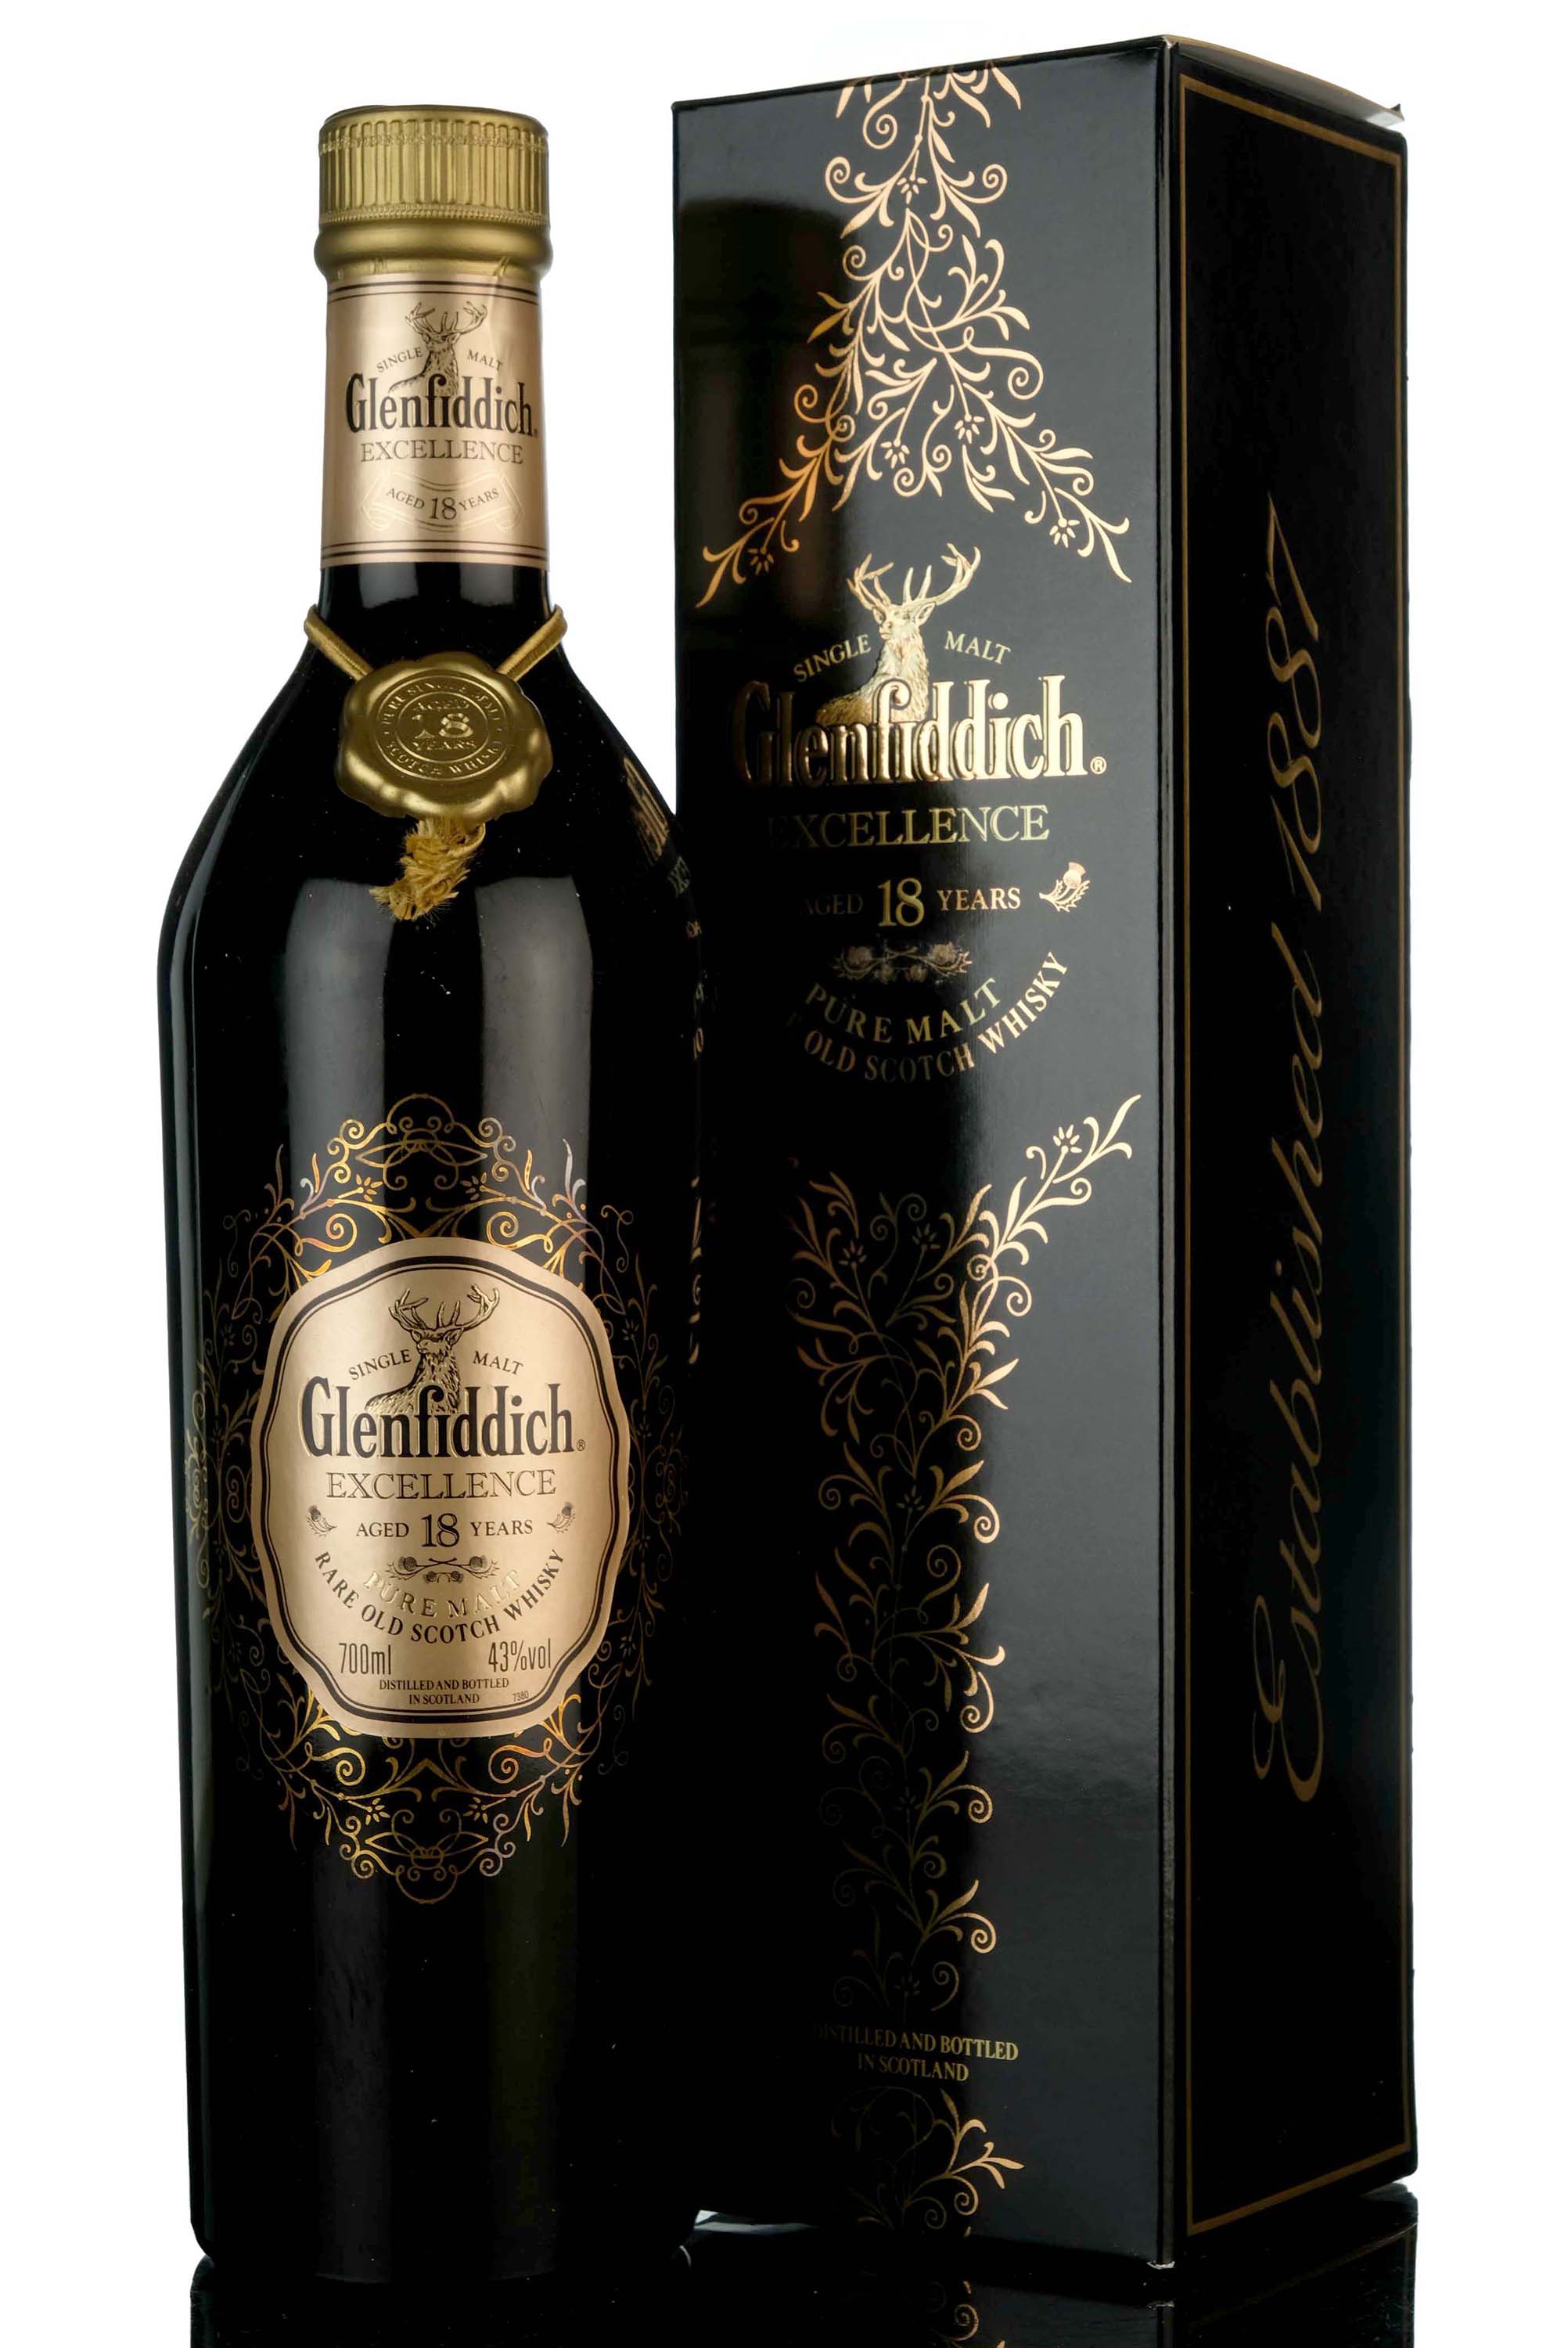 Glenfiddich 18 Year Old - Excellence - 1990s